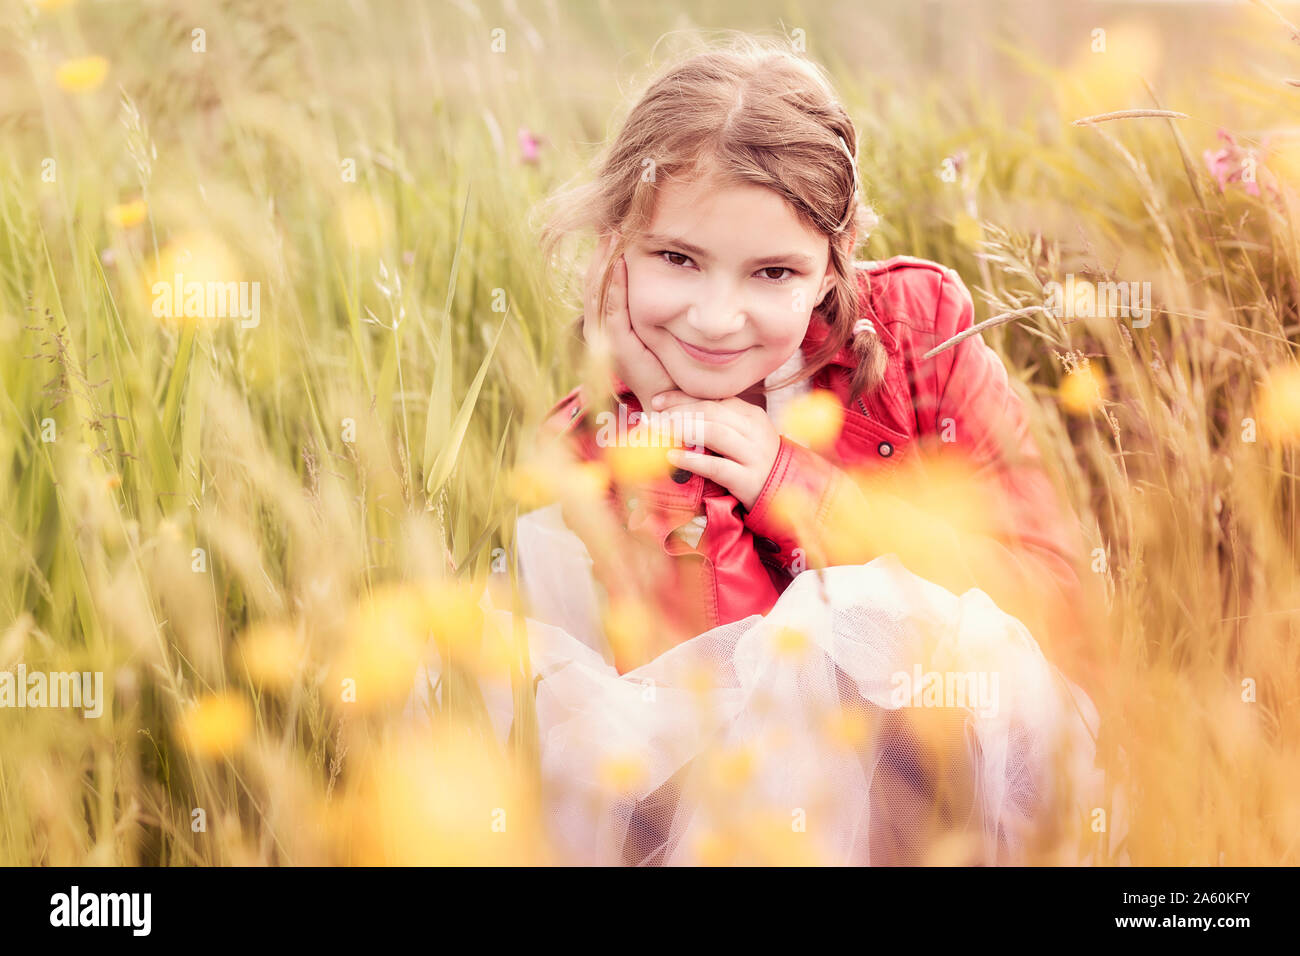 Portrait of smiling girl wearing red leather jacket crouching in flower meadow Stock Photo